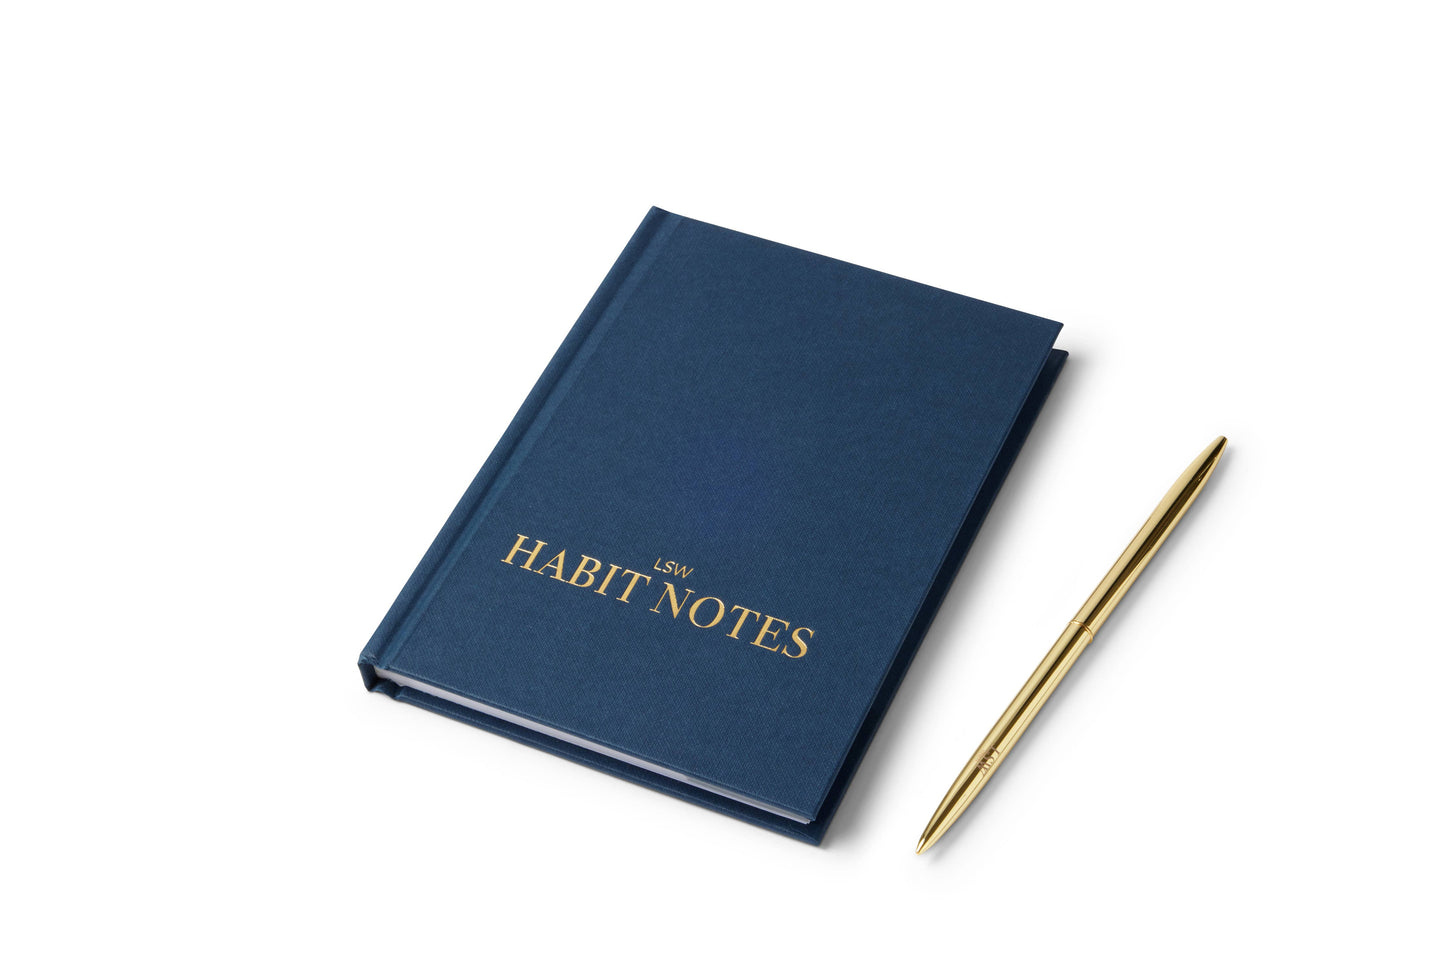 Habit Notes: Daily habit tracking journal | Valentine's gift pre order arriving this week